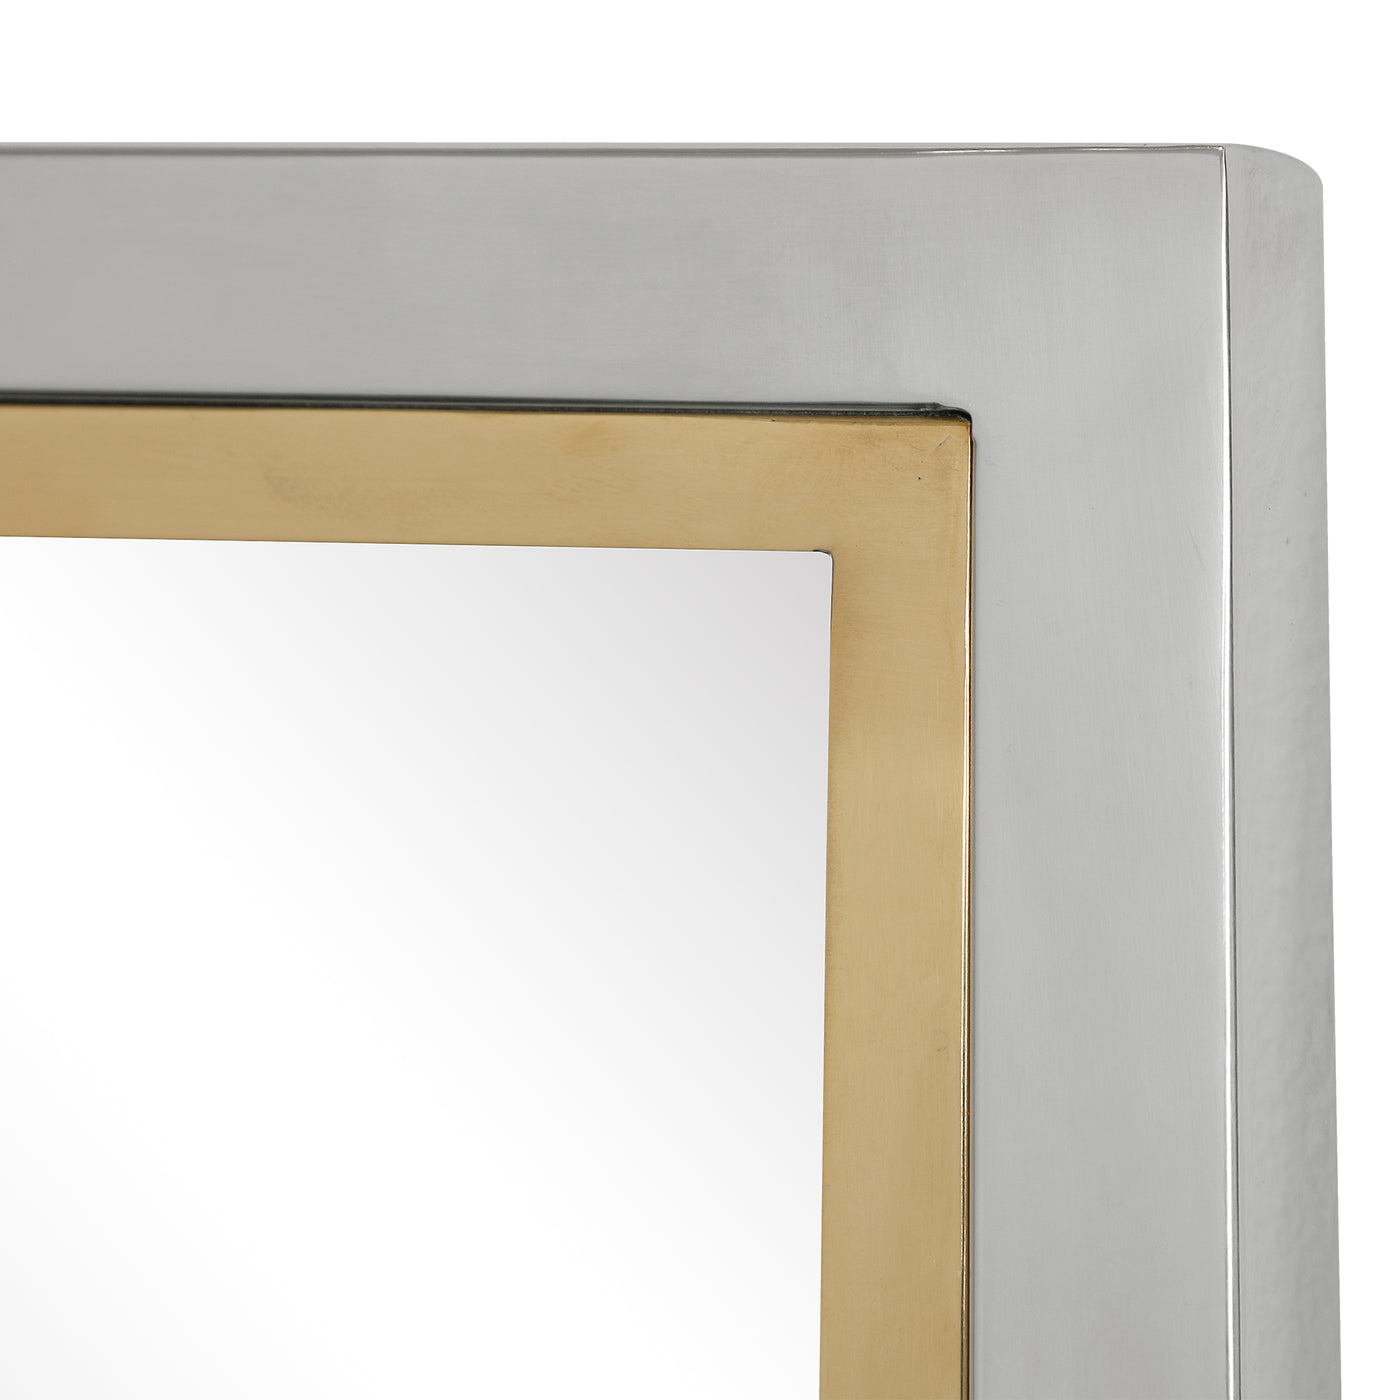 Contemporary In Style, This Simple Vanity Mirror Showcases A Sleek Stainless Steel Frame In A Two-tone Plated Polished Chr...